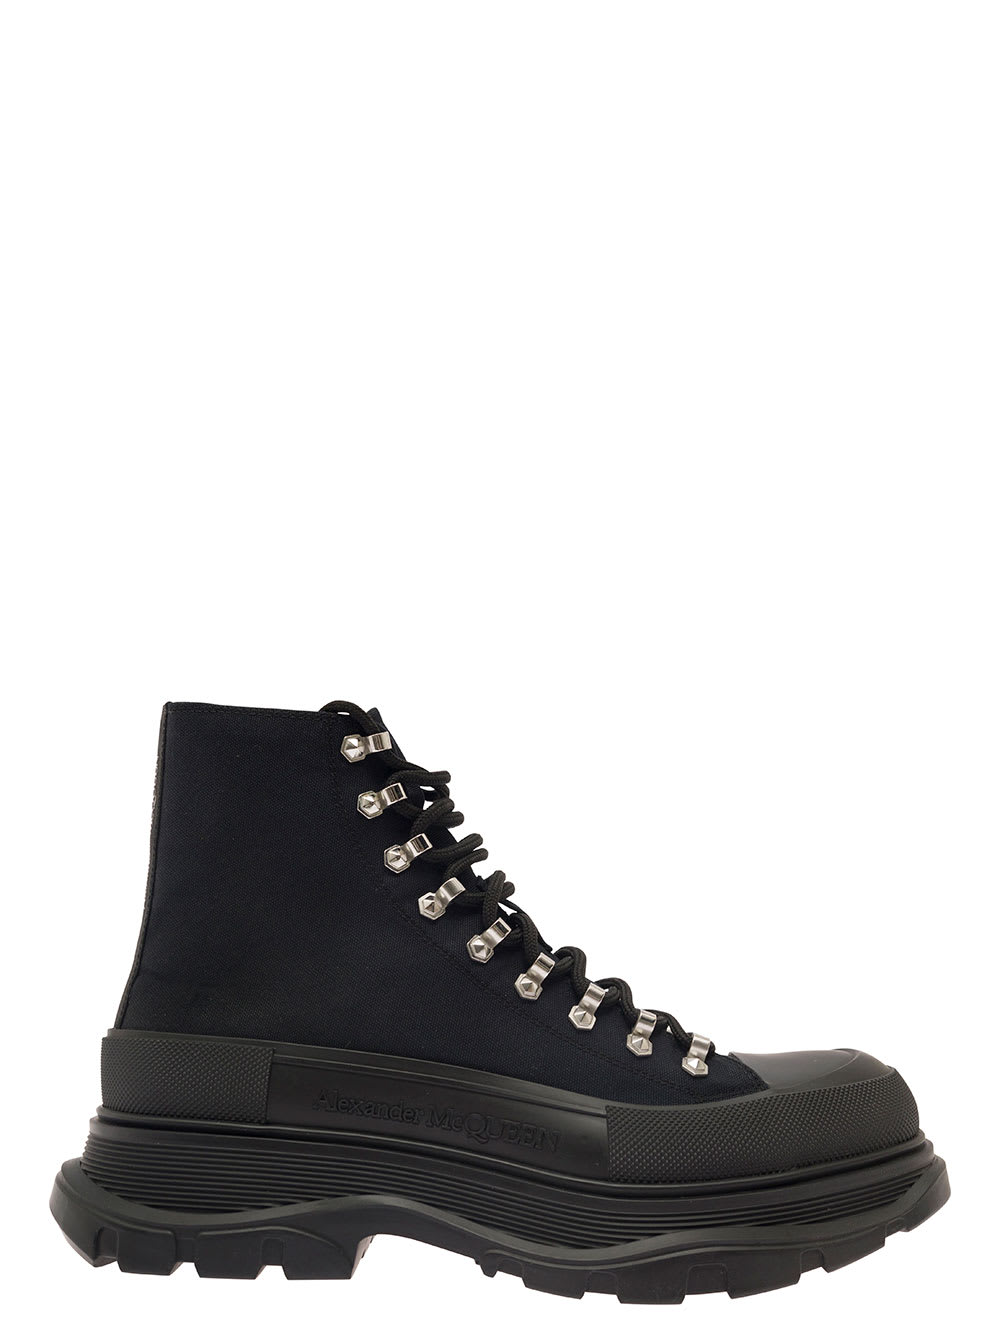 Alexander McQueen trade Slick Black Lace-up Boots With Thread Sole In Canvas Man